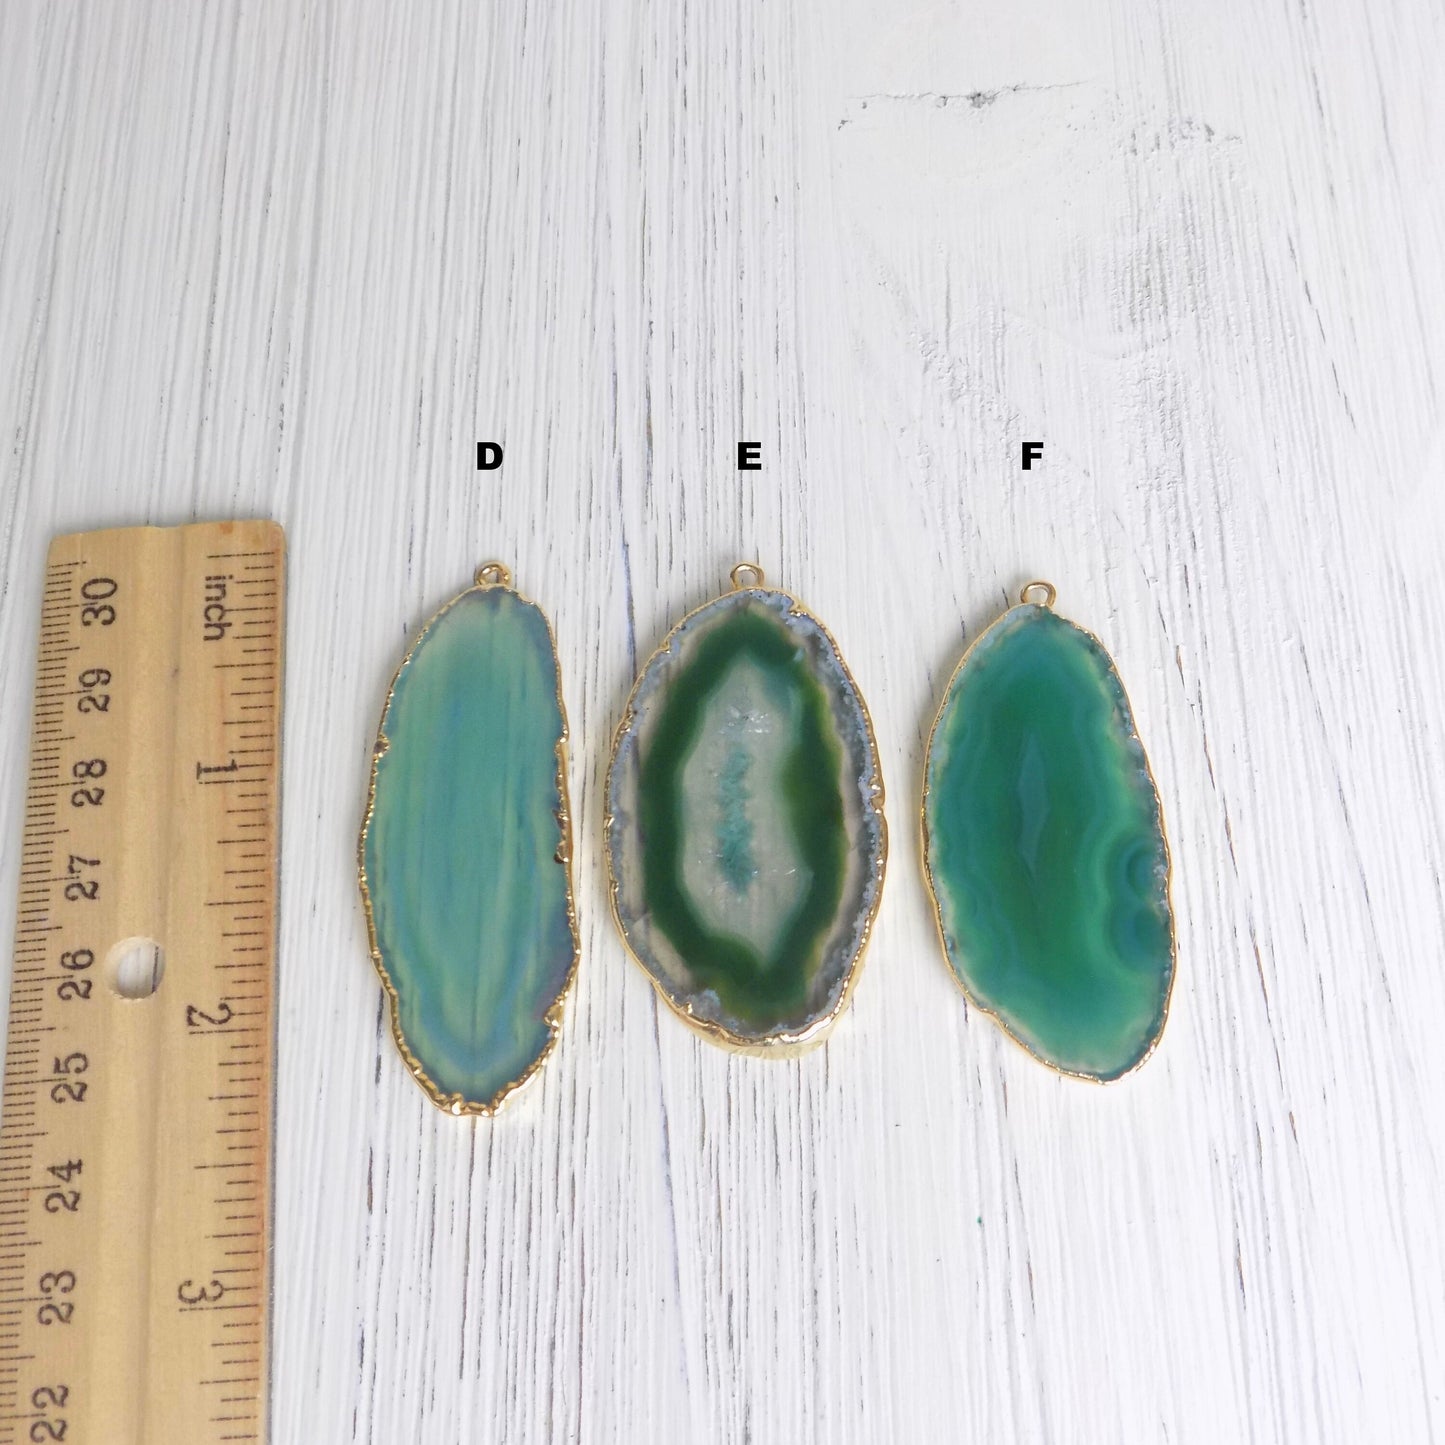 Agate Necklace, Green Agate, Slice Agate Pendant, Sliced Agate, Geode Necklace, Gold Layering, Boho, Unique Mothers Day Gift Women G13-256